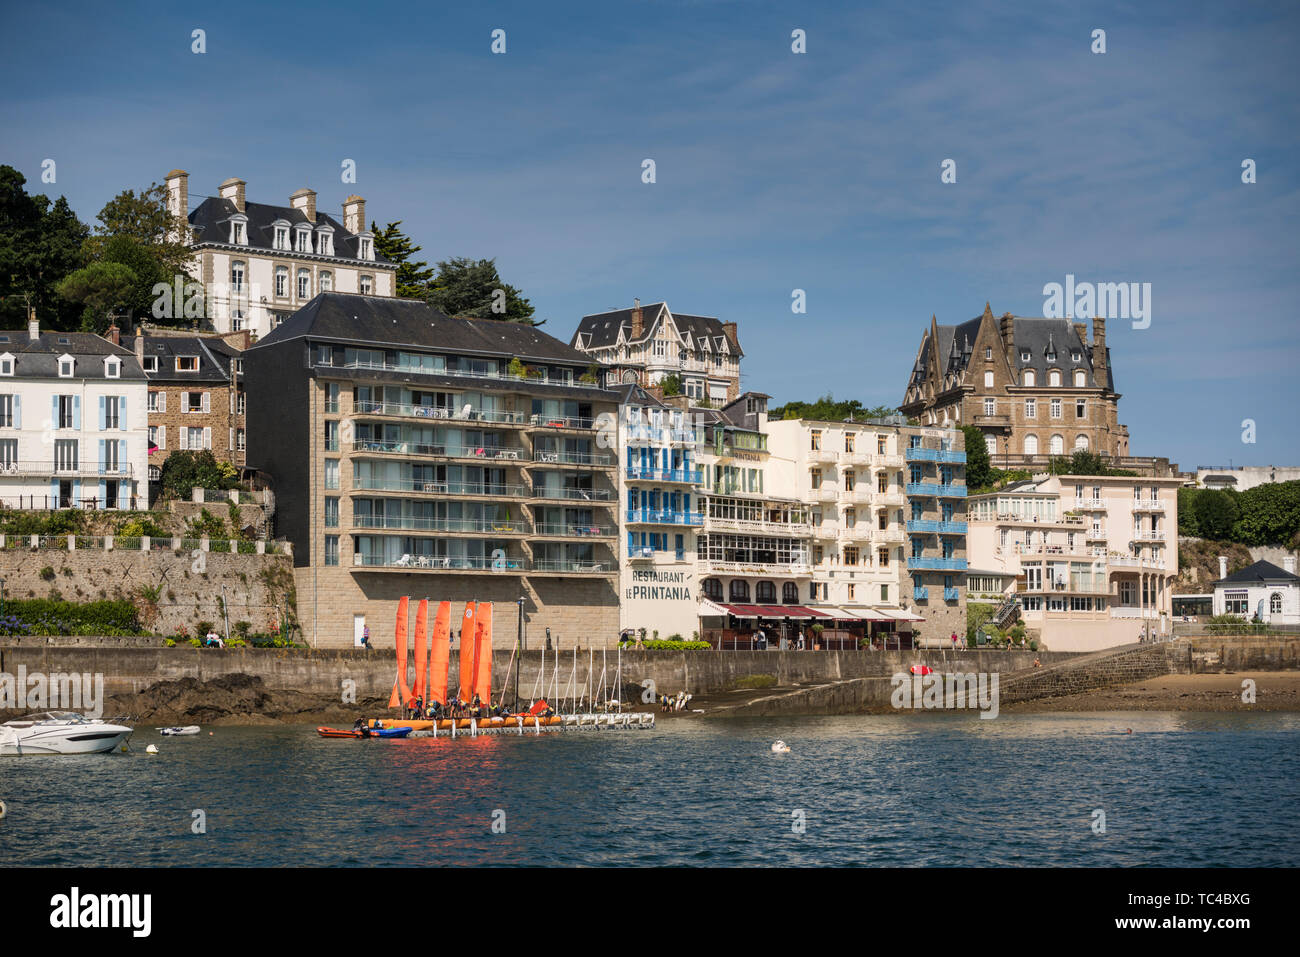 View of Dinard seen from river ferry, Brittany, France Stock Photo